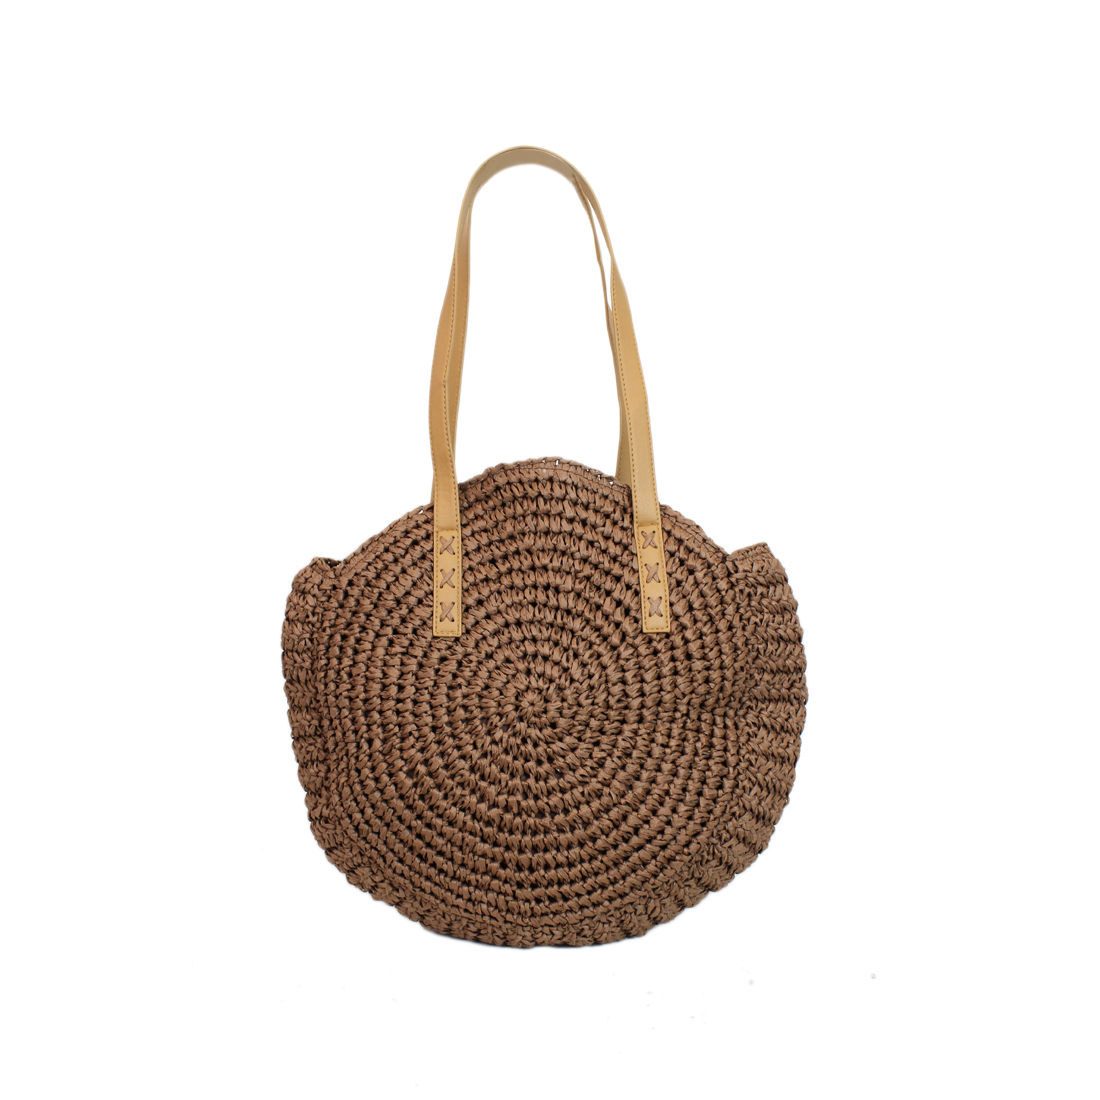 Round rattan with long handles